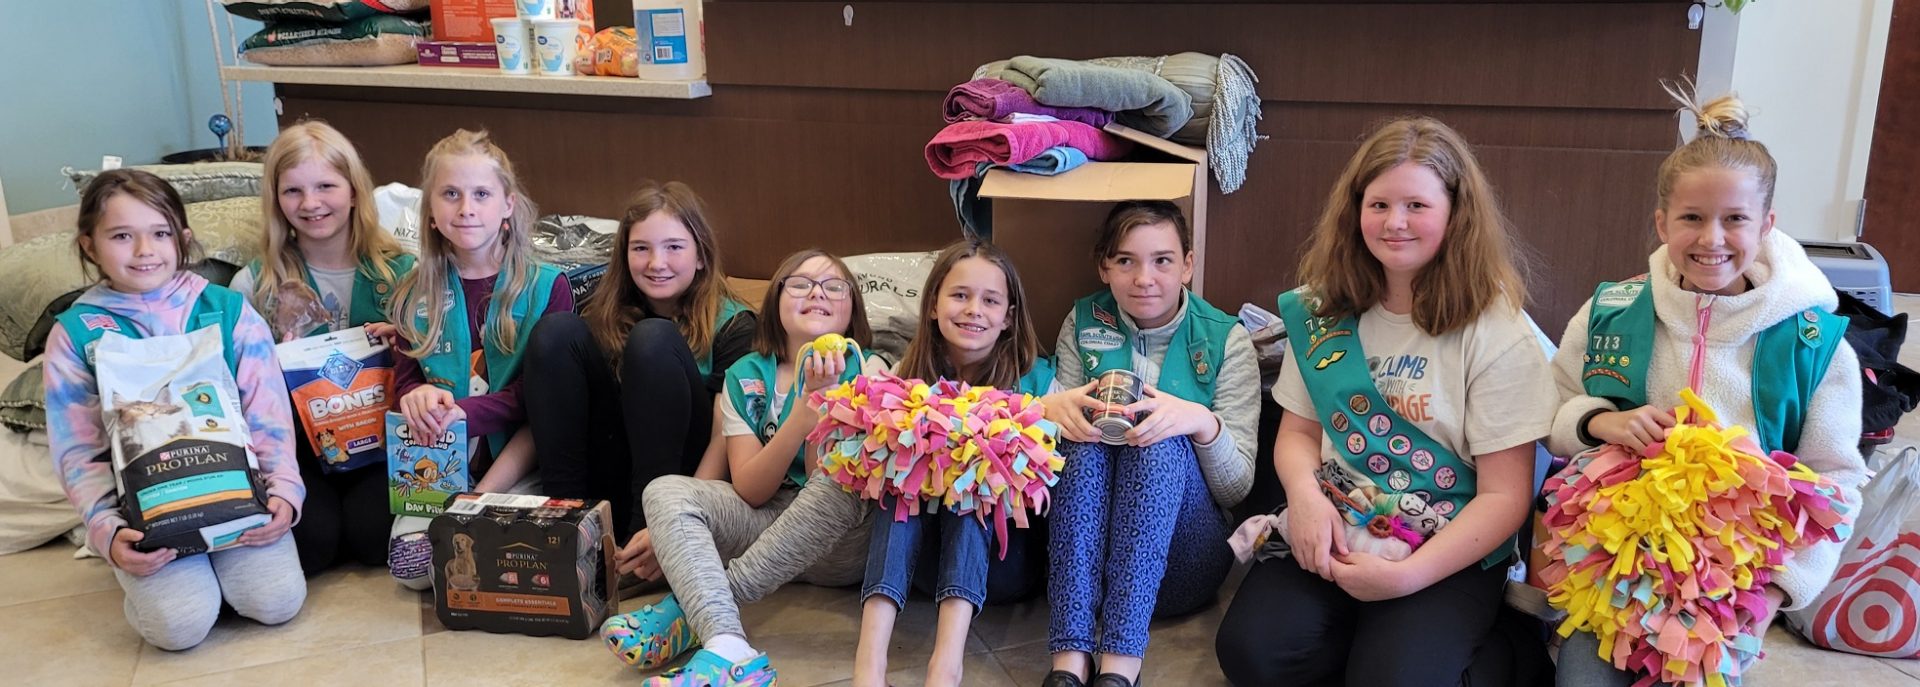  Girl Scout Troop 723 of Moyock, North Carolina held a Donation Drive to Help the Currituck Animal Shelter 